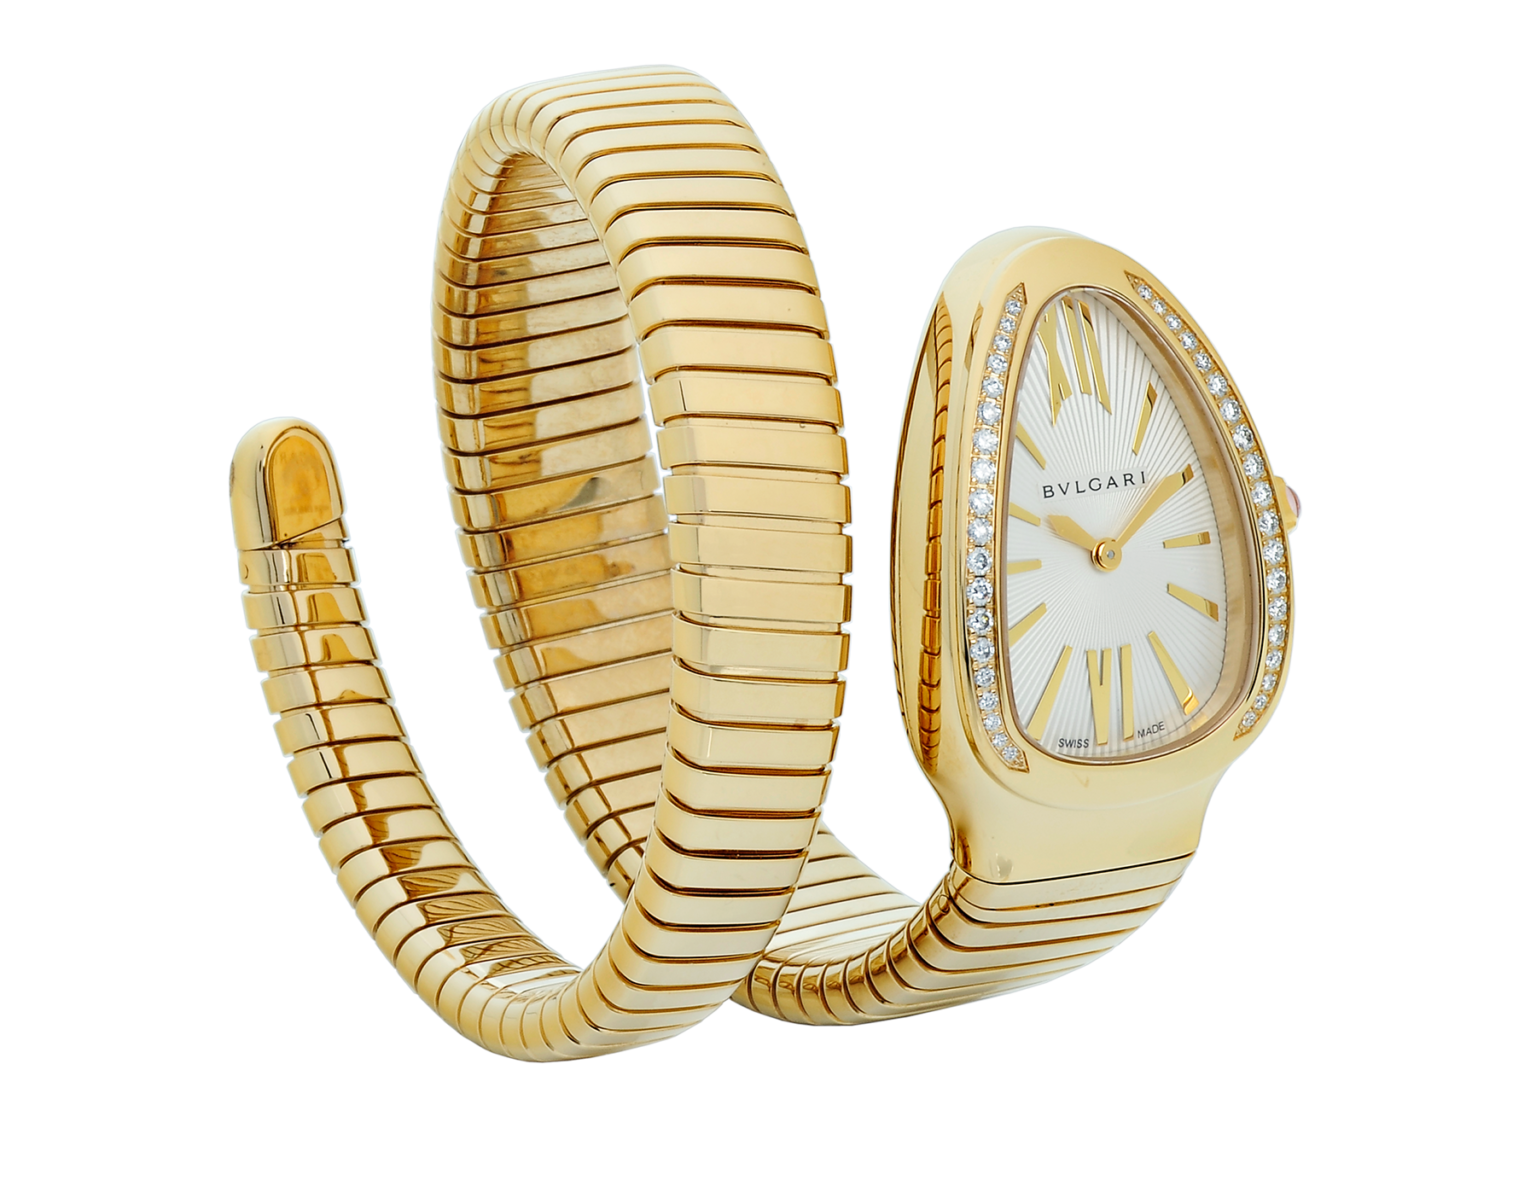 Watch And Act Auction Item Lot 3 Bulgari S Golden Serpent Time